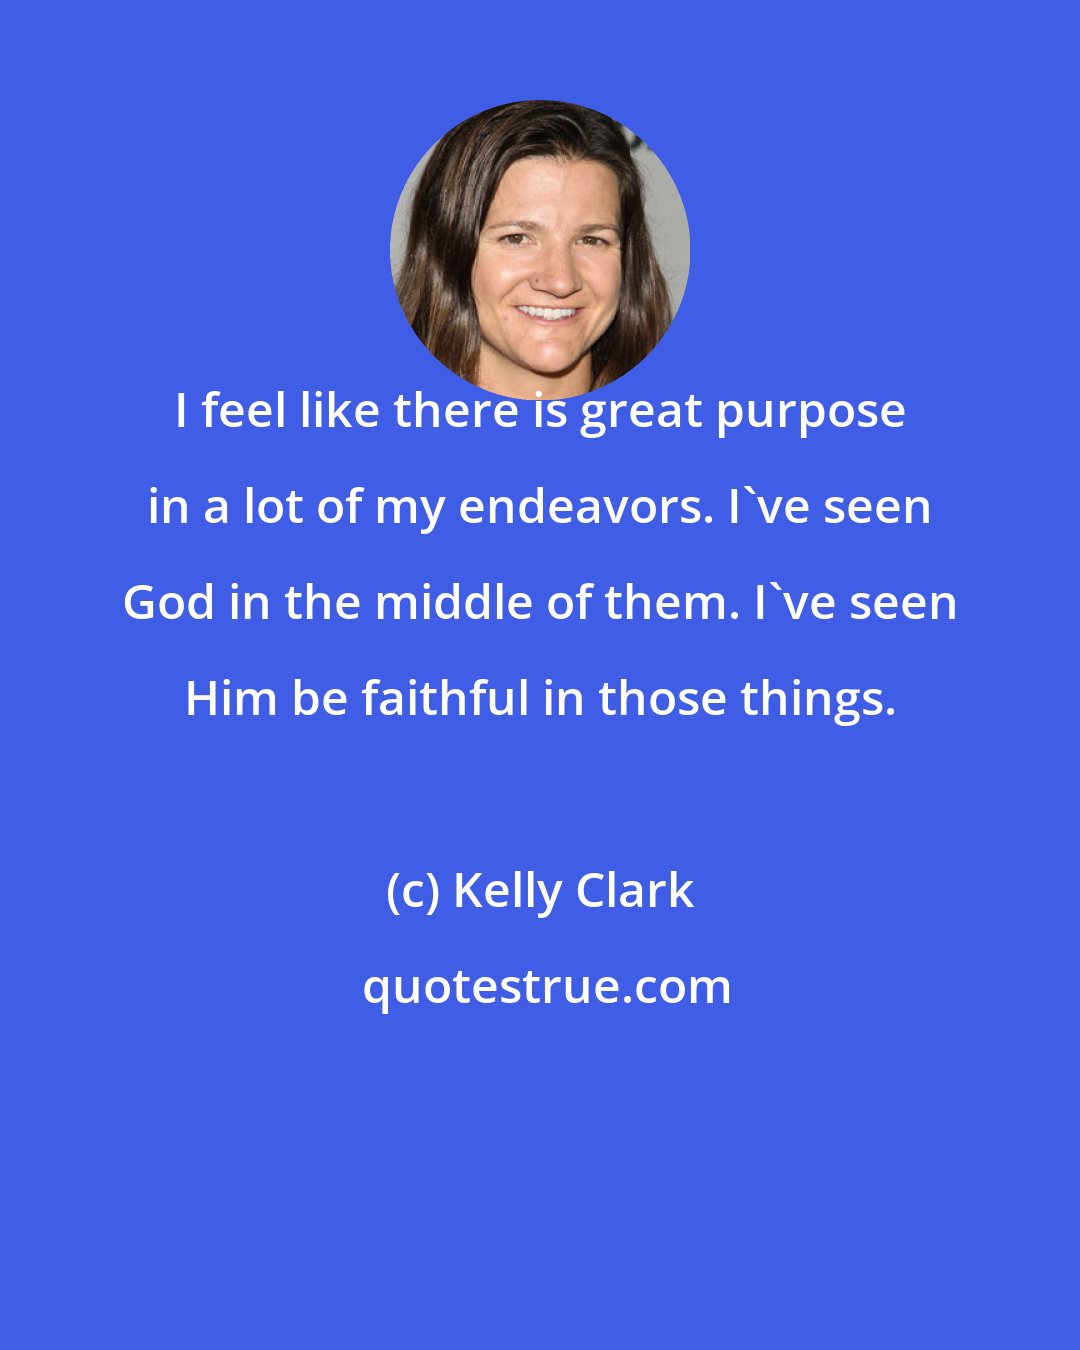 Kelly Clark: I feel like there is great purpose in a lot of my endeavors. I've seen God in the middle of them. I've seen Him be faithful in those things.